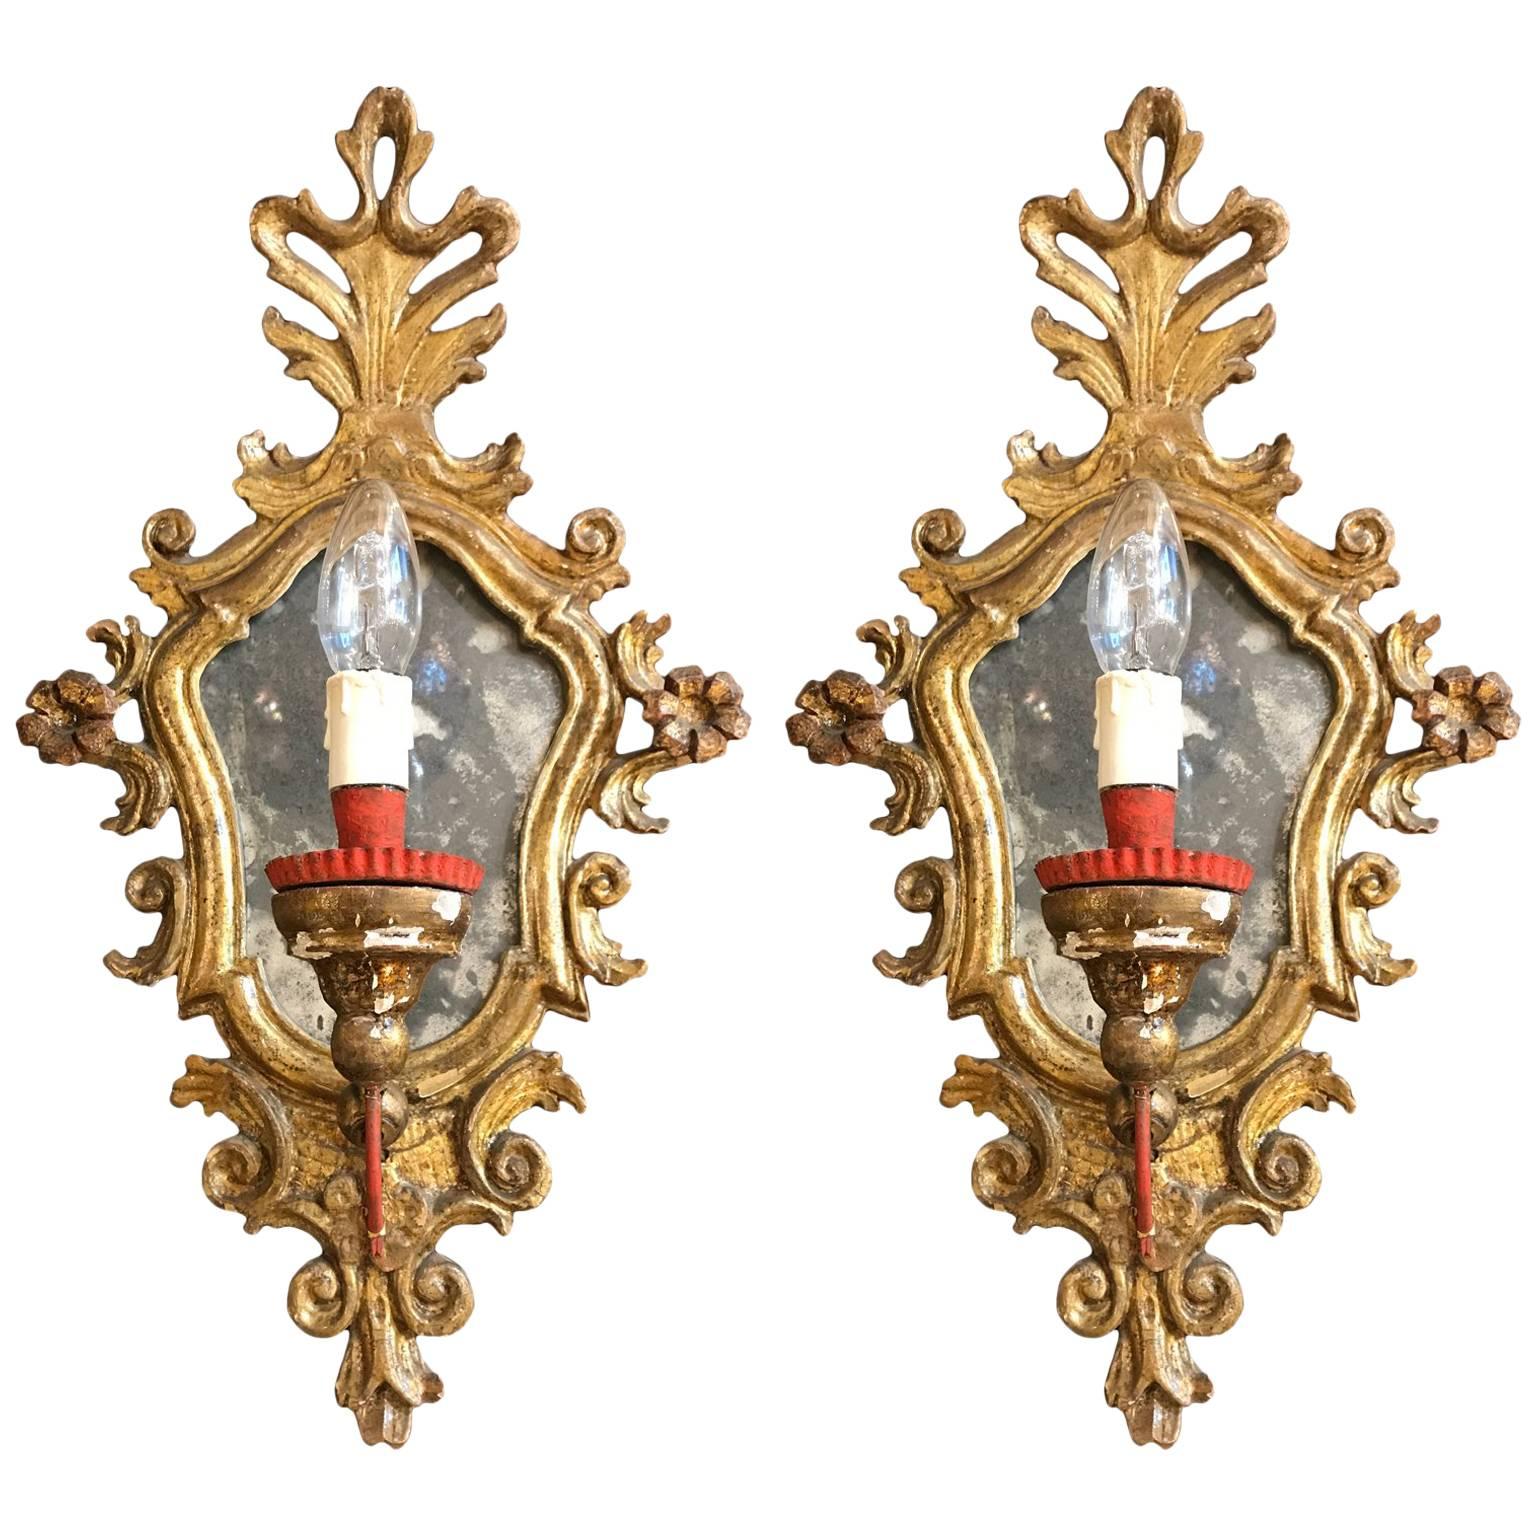 A pair of Italian Louis XV one light wall sconces with original mercury mirror plates within mecca gilded frames, carved with vegetal elements and scrolling  motifs.
In the lower part, one curved wrought iron sconce arm for candle, probably replaced